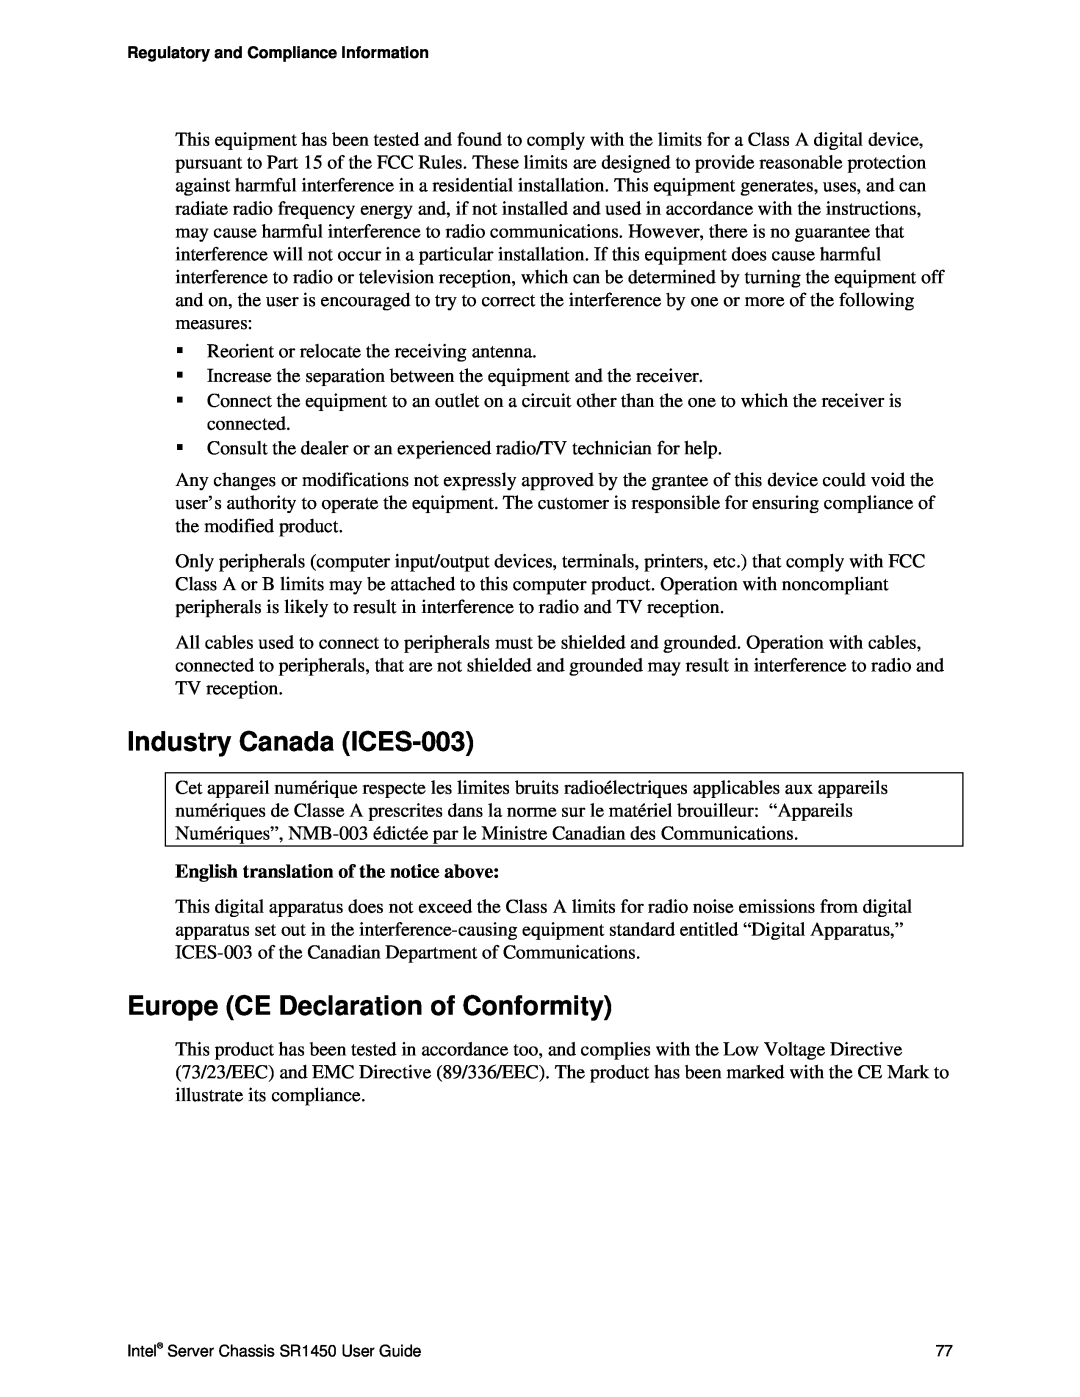 Intel SR1450 manual Industry Canada ICES-003, Europe CE Declaration of Conformity, English translation of the notice above 